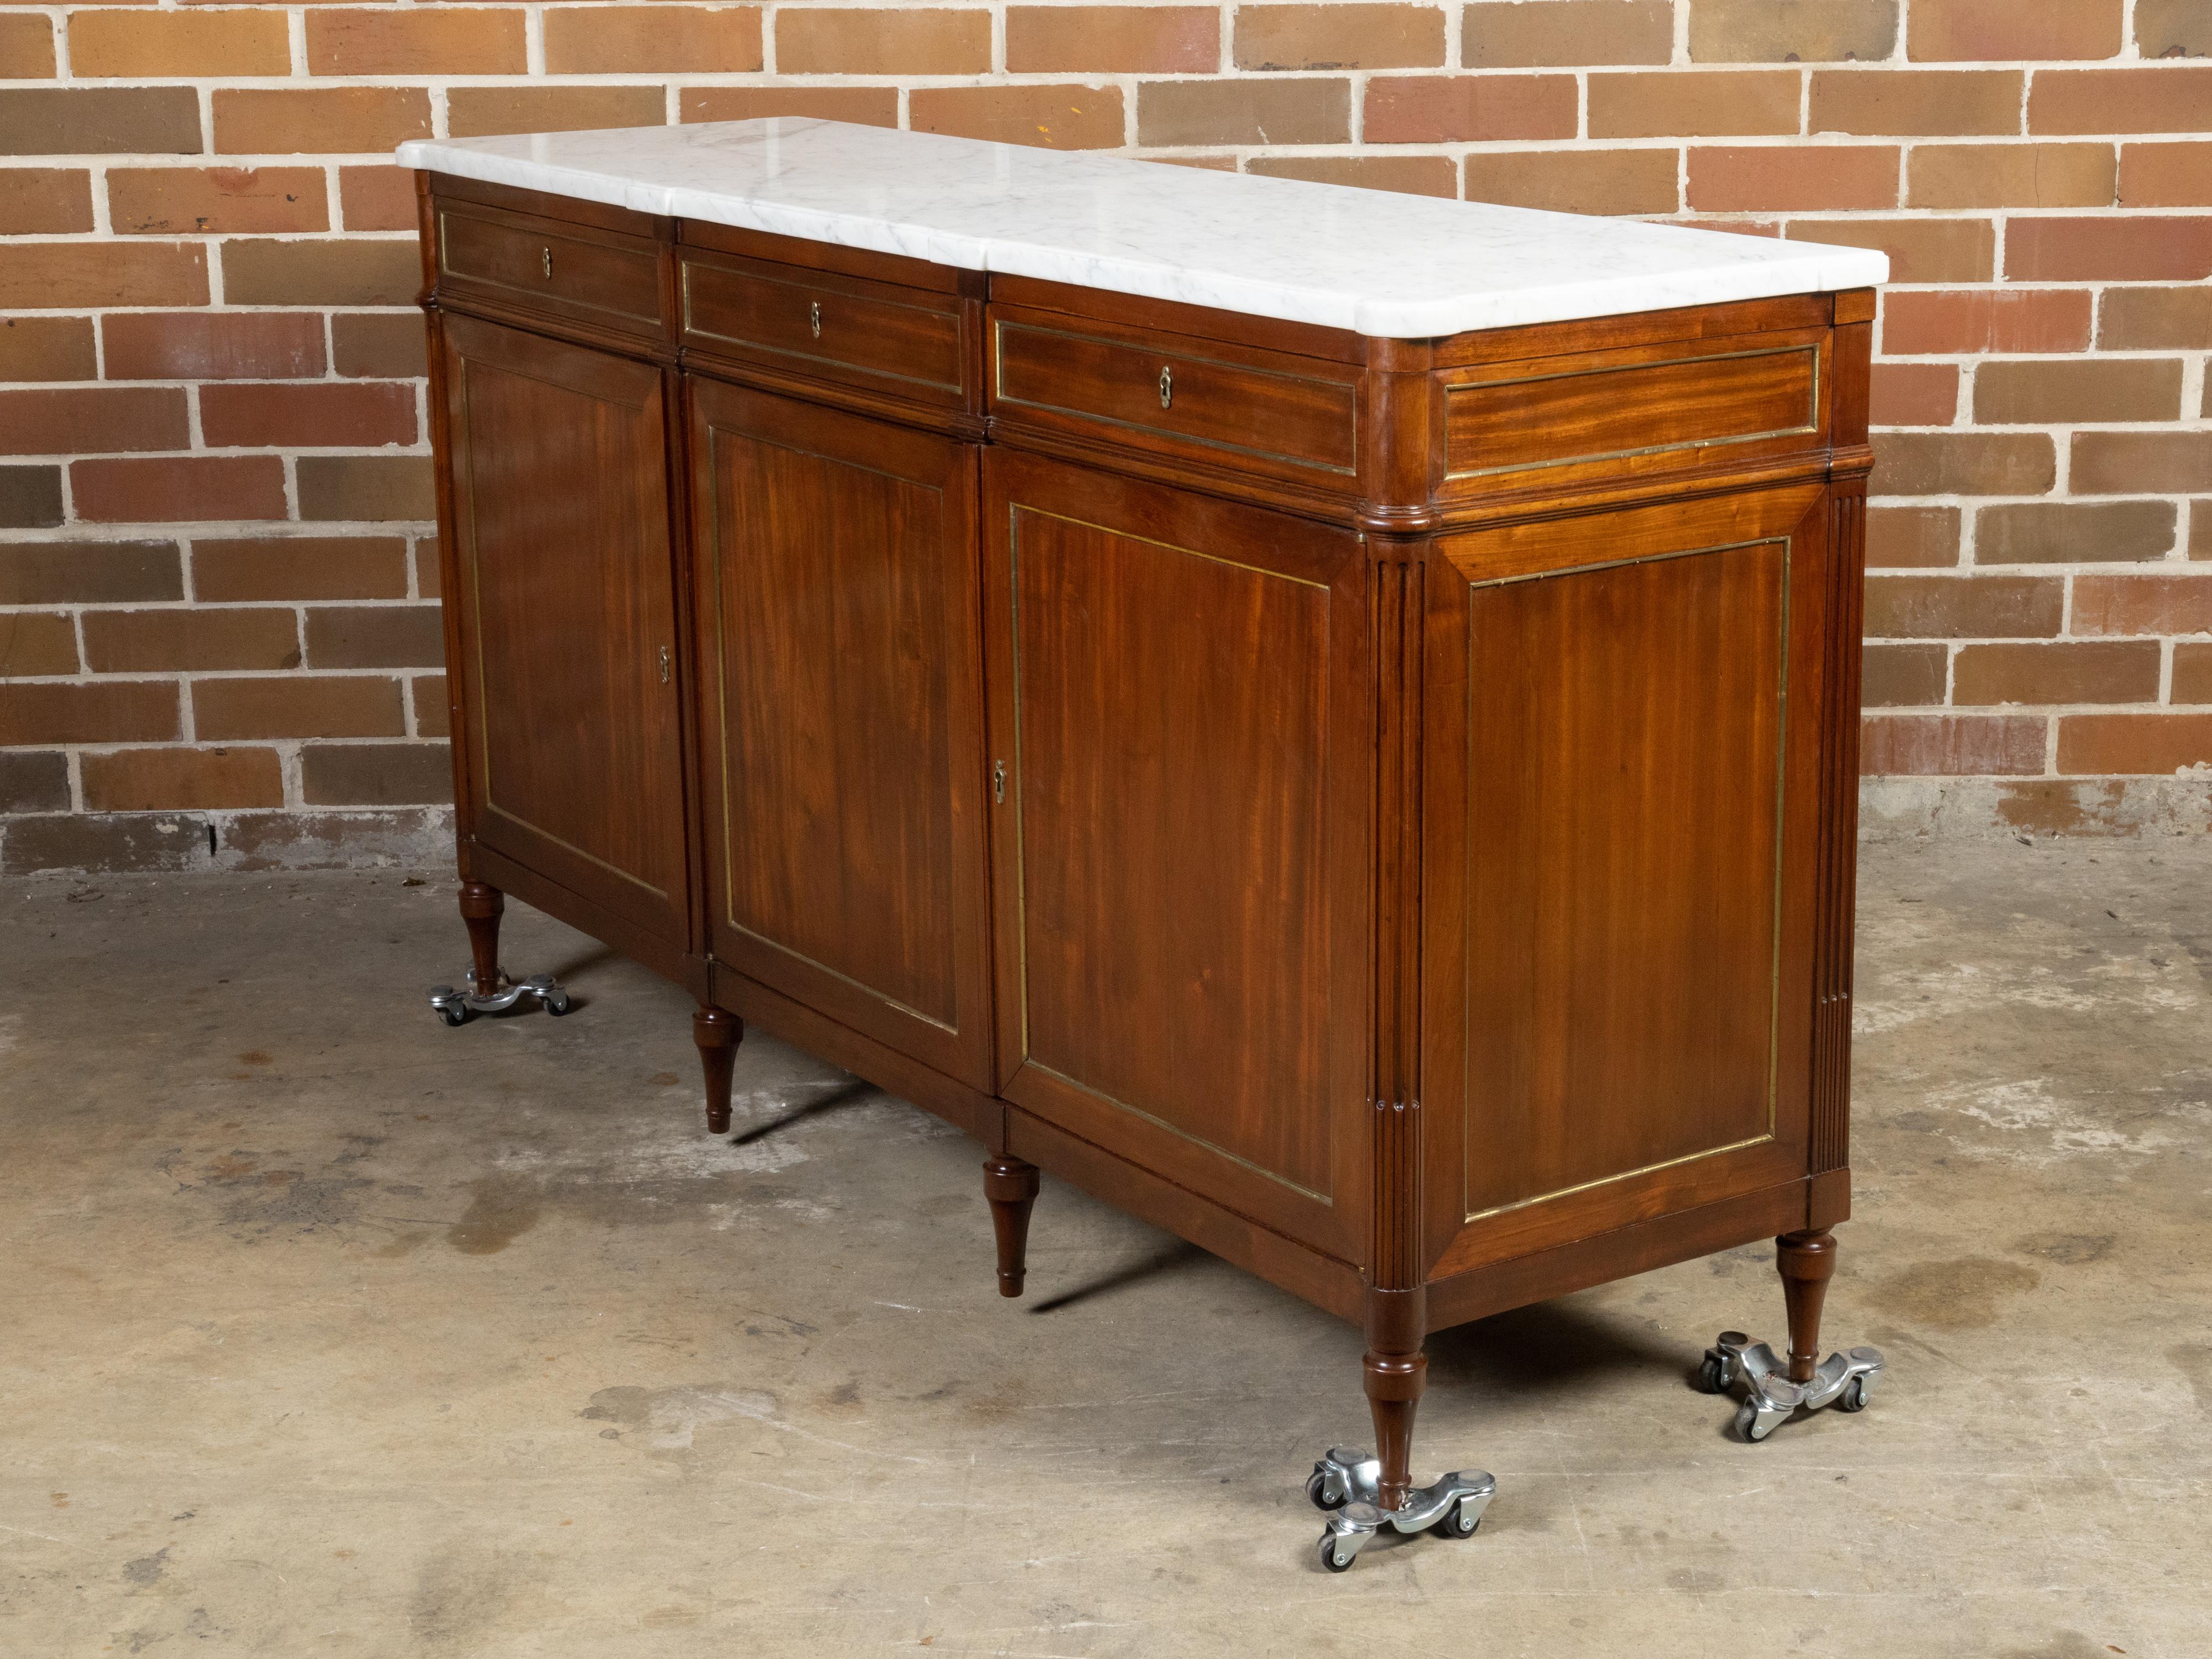 French 19th Century Walnut Sideboard with White Marble Top and Brass Accents For Sale 4